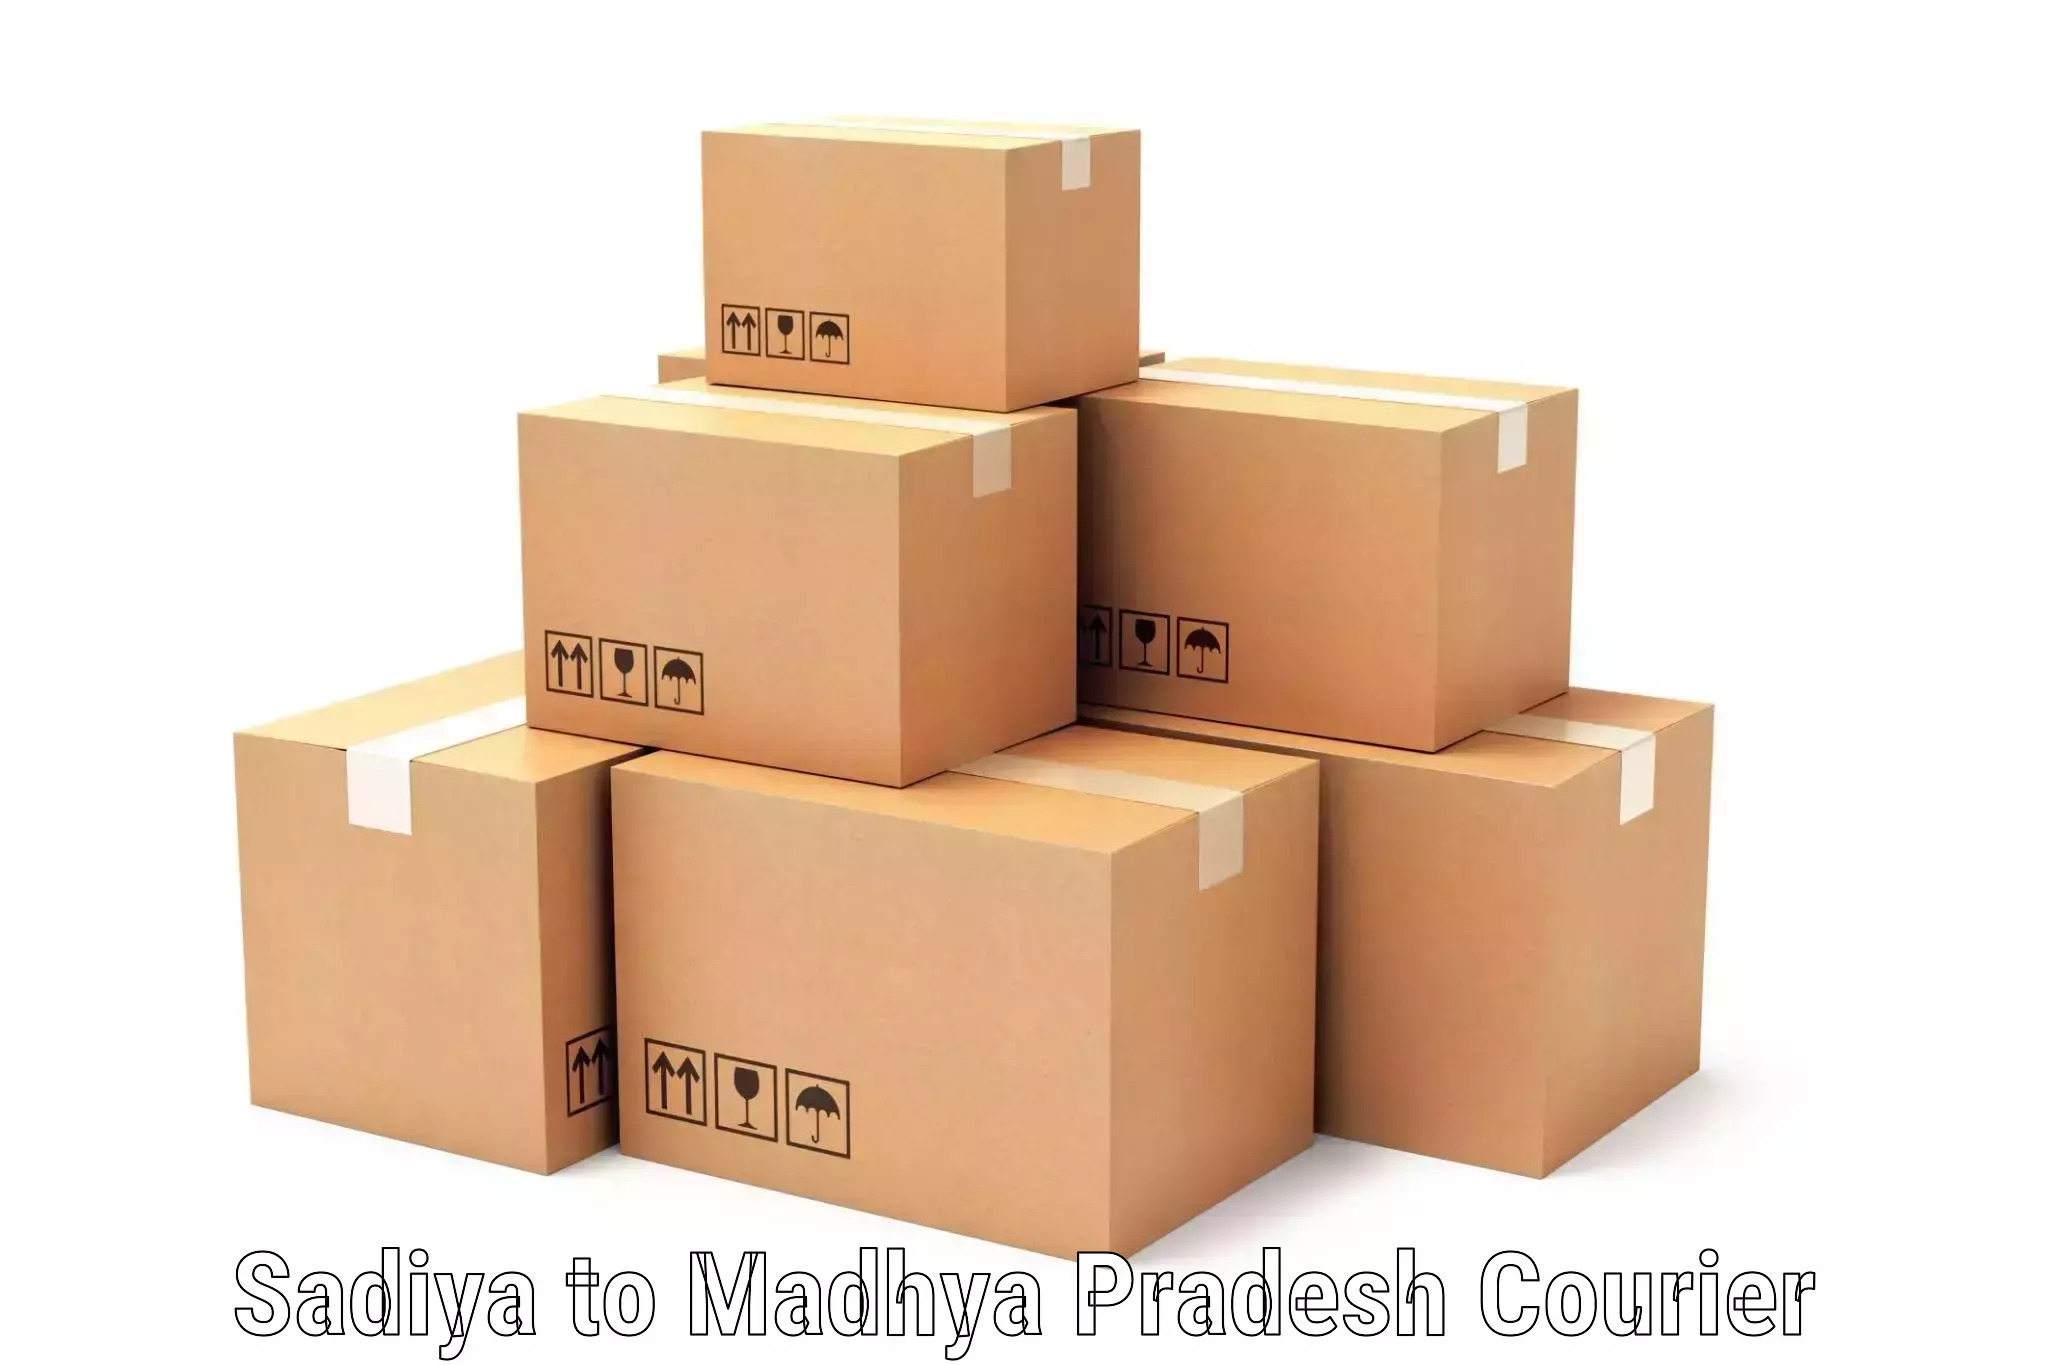 Professional courier services Sadiya to Bhopal